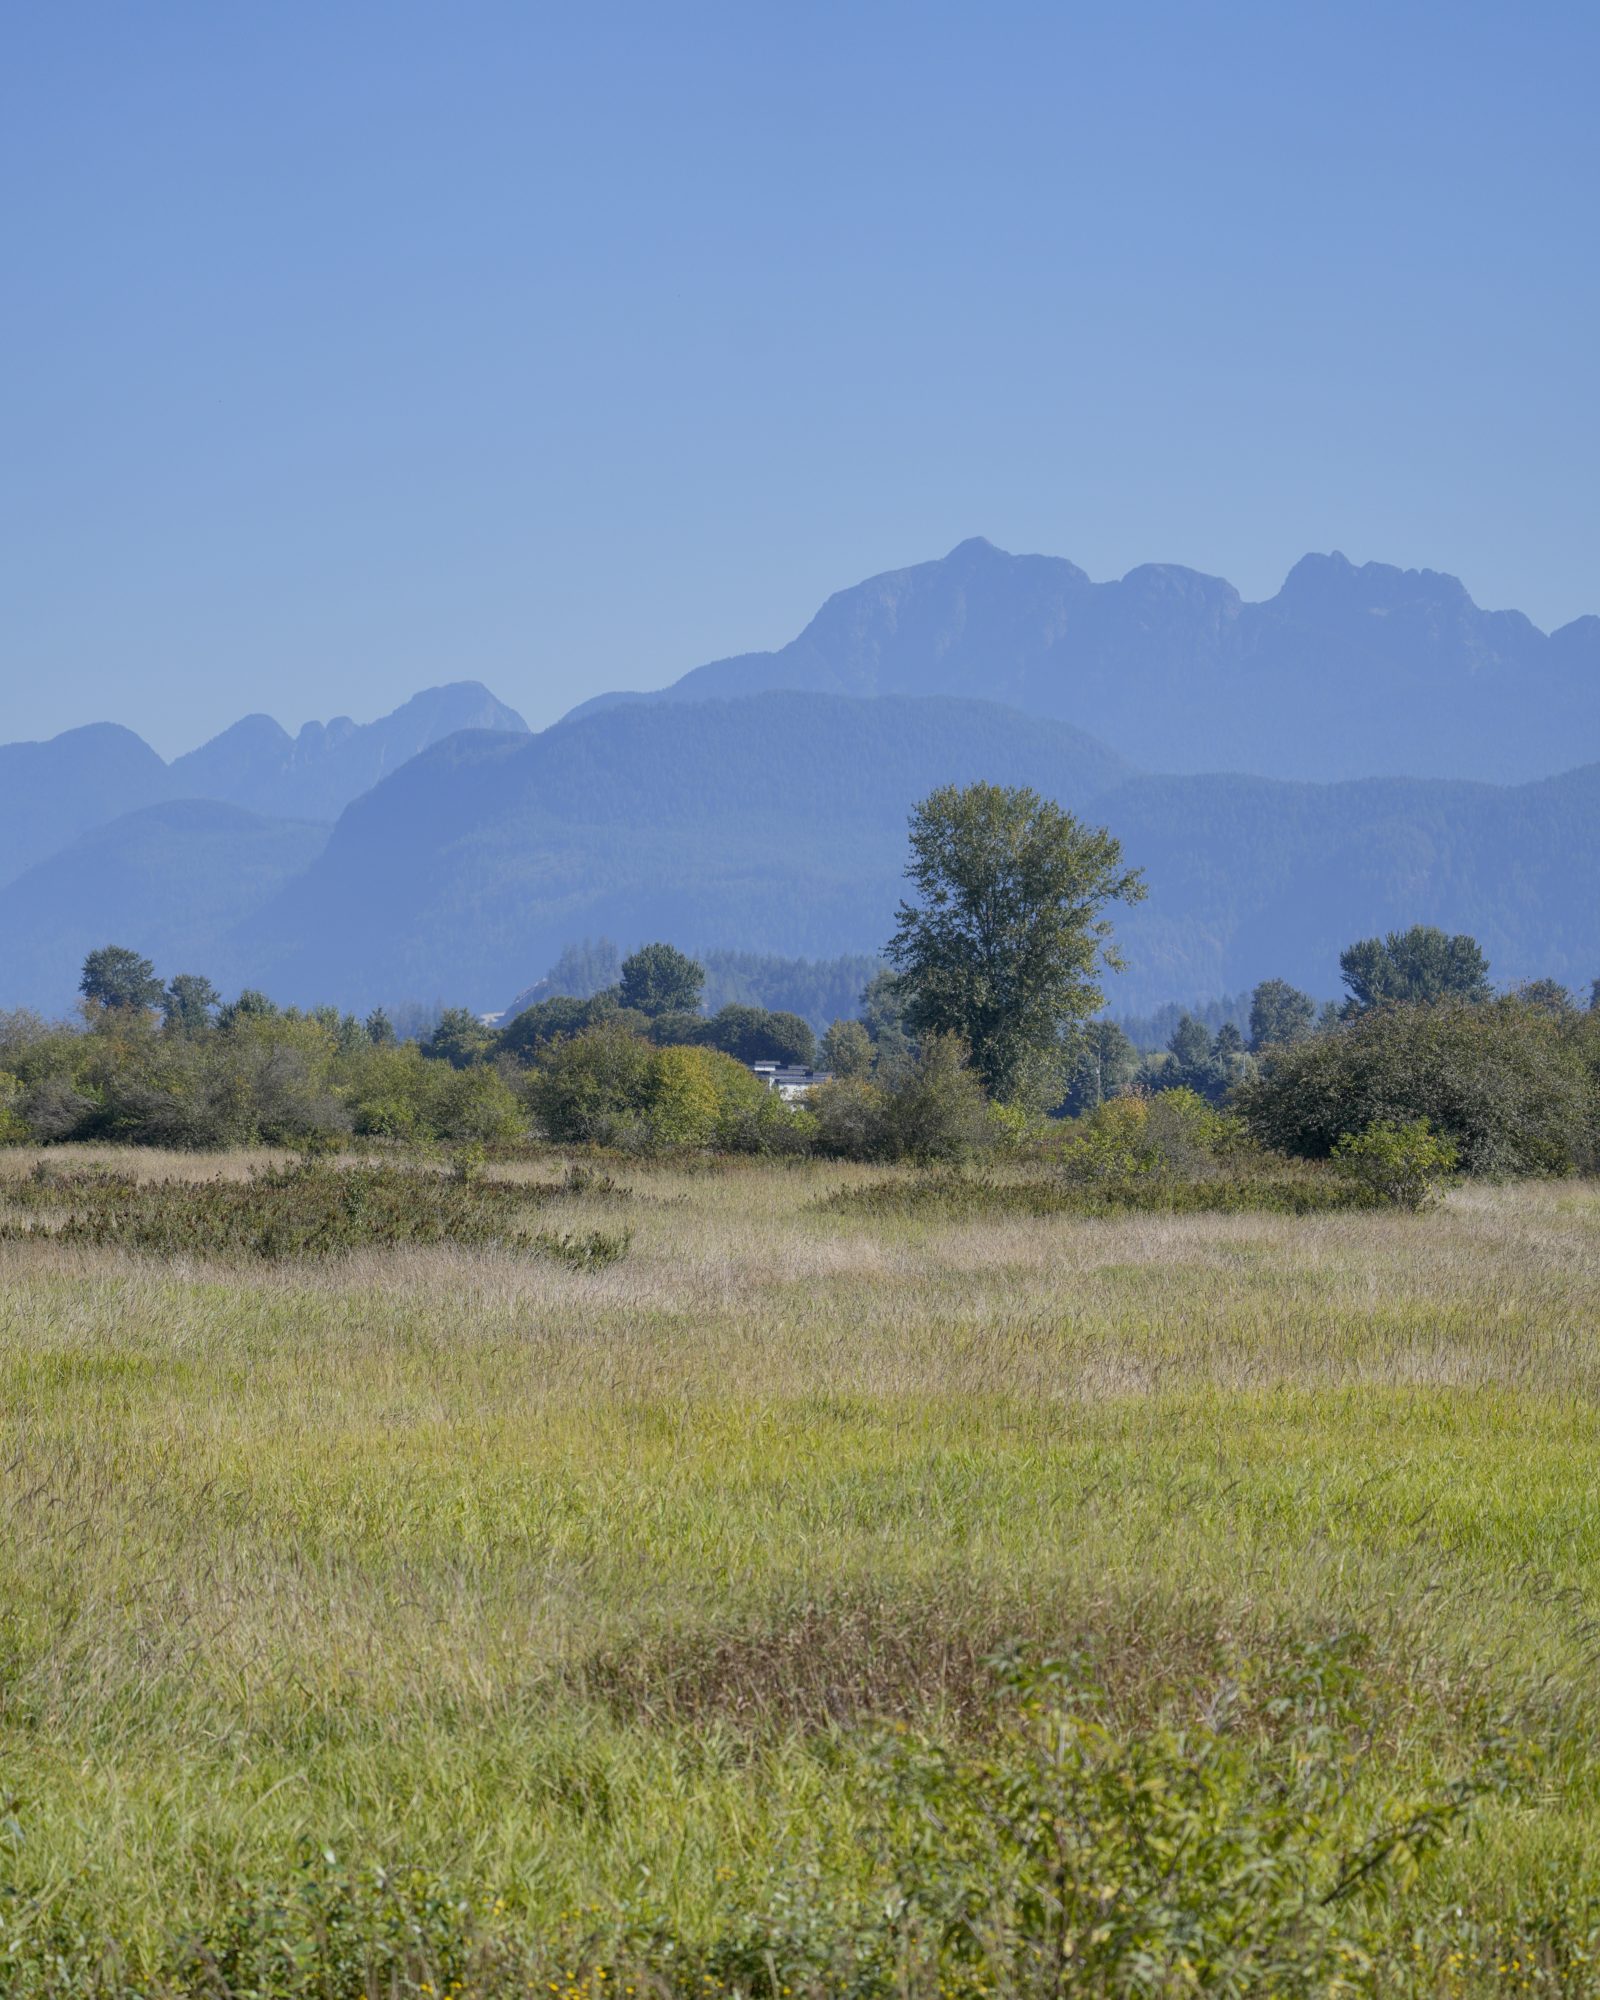 A portrait shot of the landscape along the Alouette River. High grasses, trees and mountains